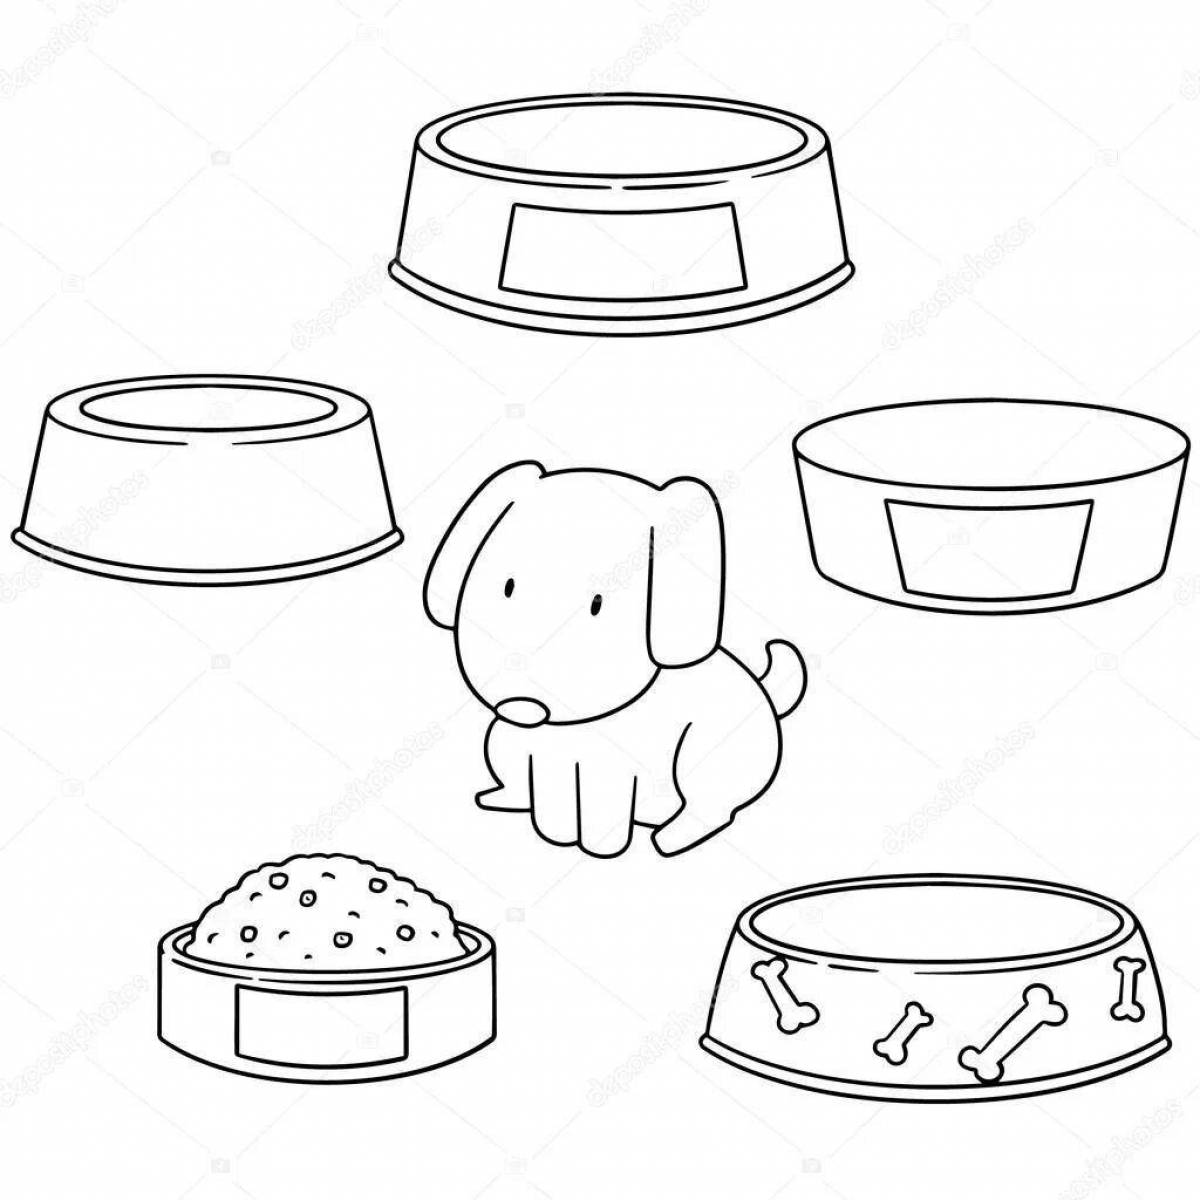 Lovely cat food coloring page